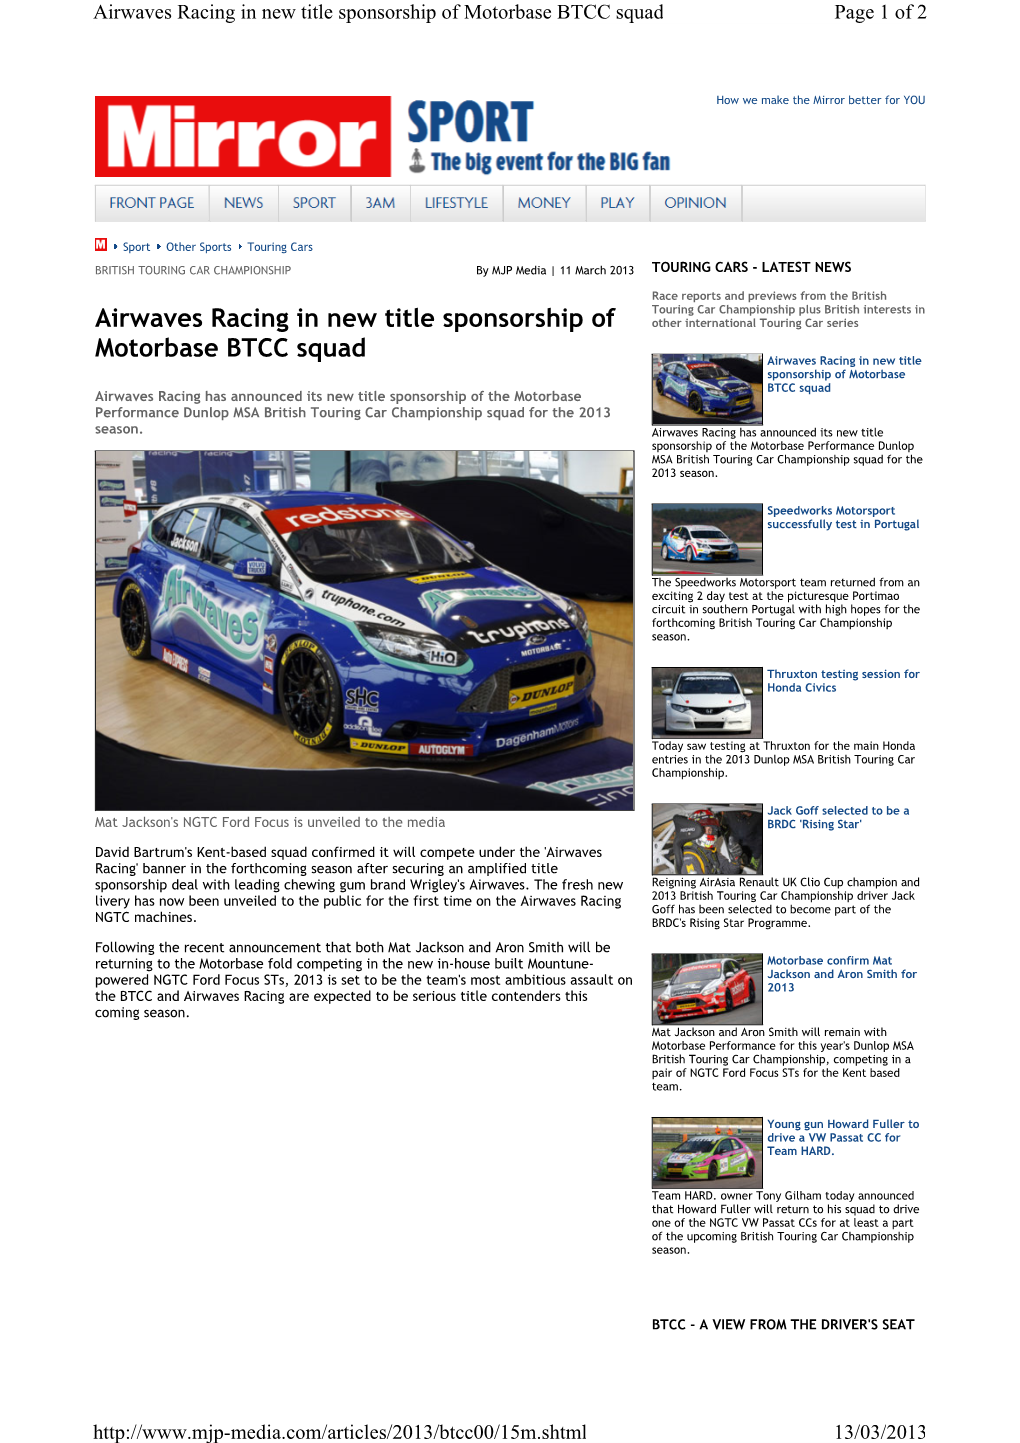 Airwaves Racing in New Title Sponsorship of Motorbase BTCC Squad Page 1 of 2